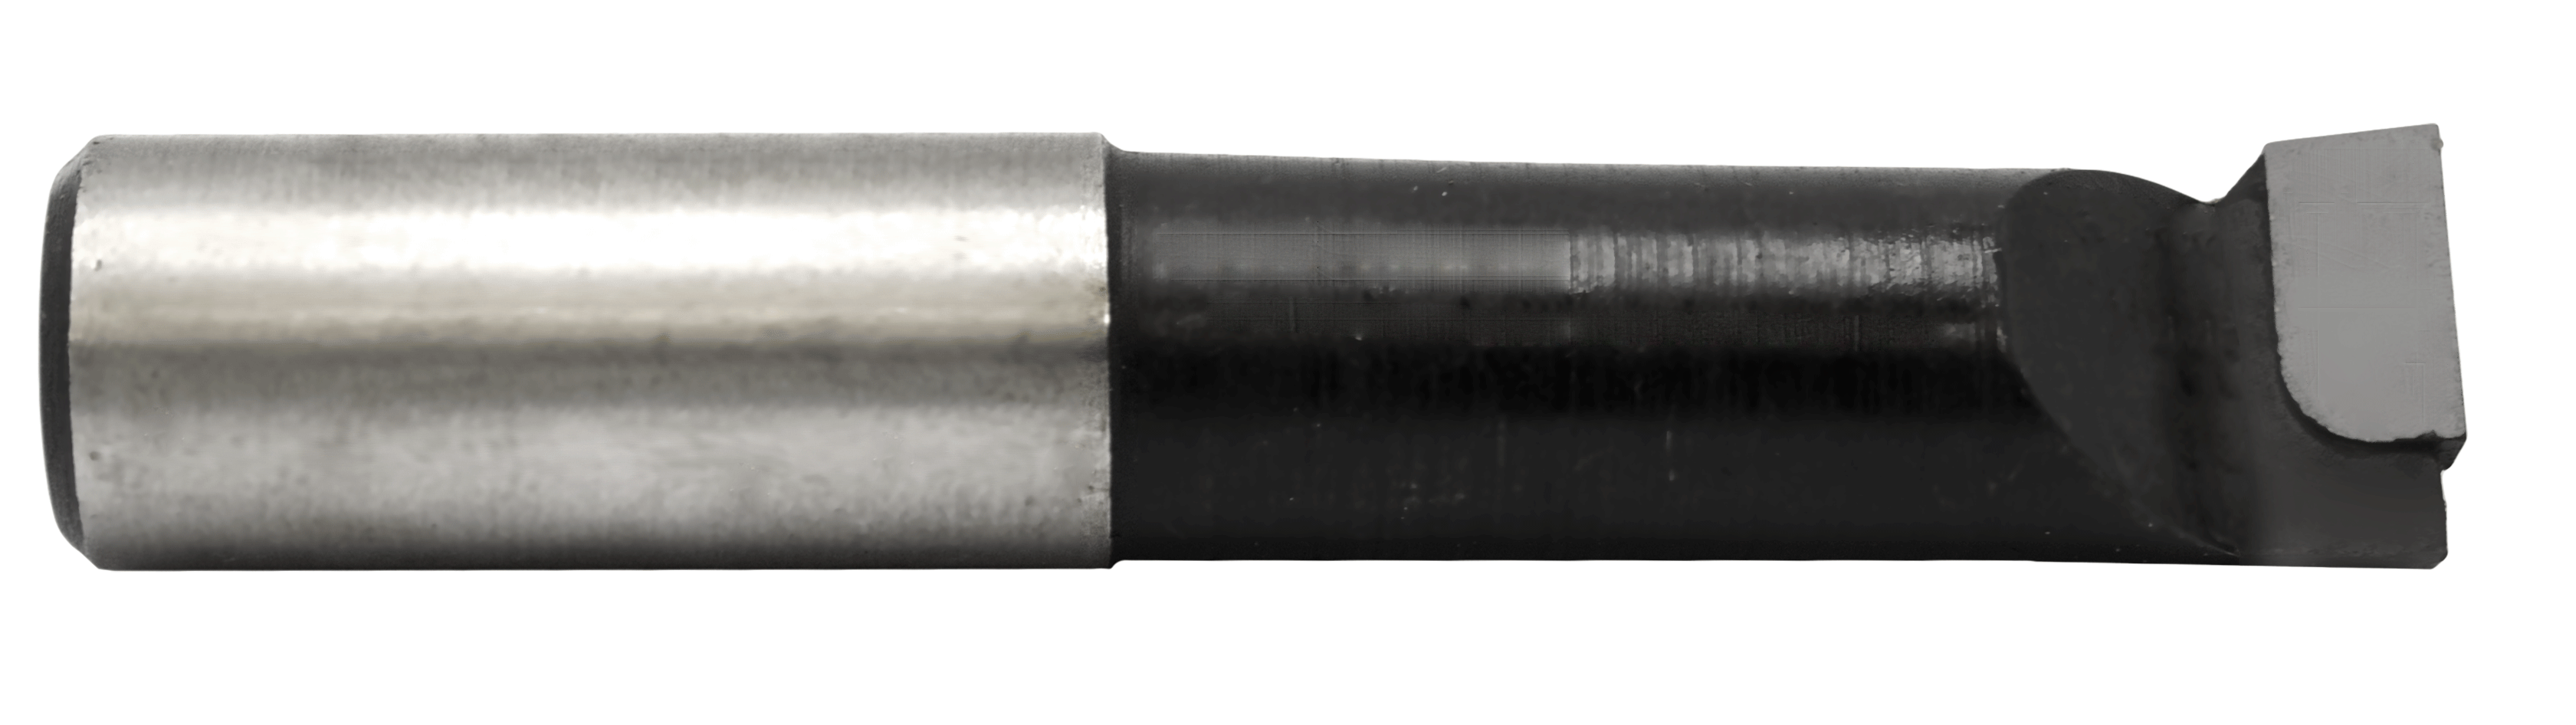 Super-Bore 16mm" C-6 for Steel Applications